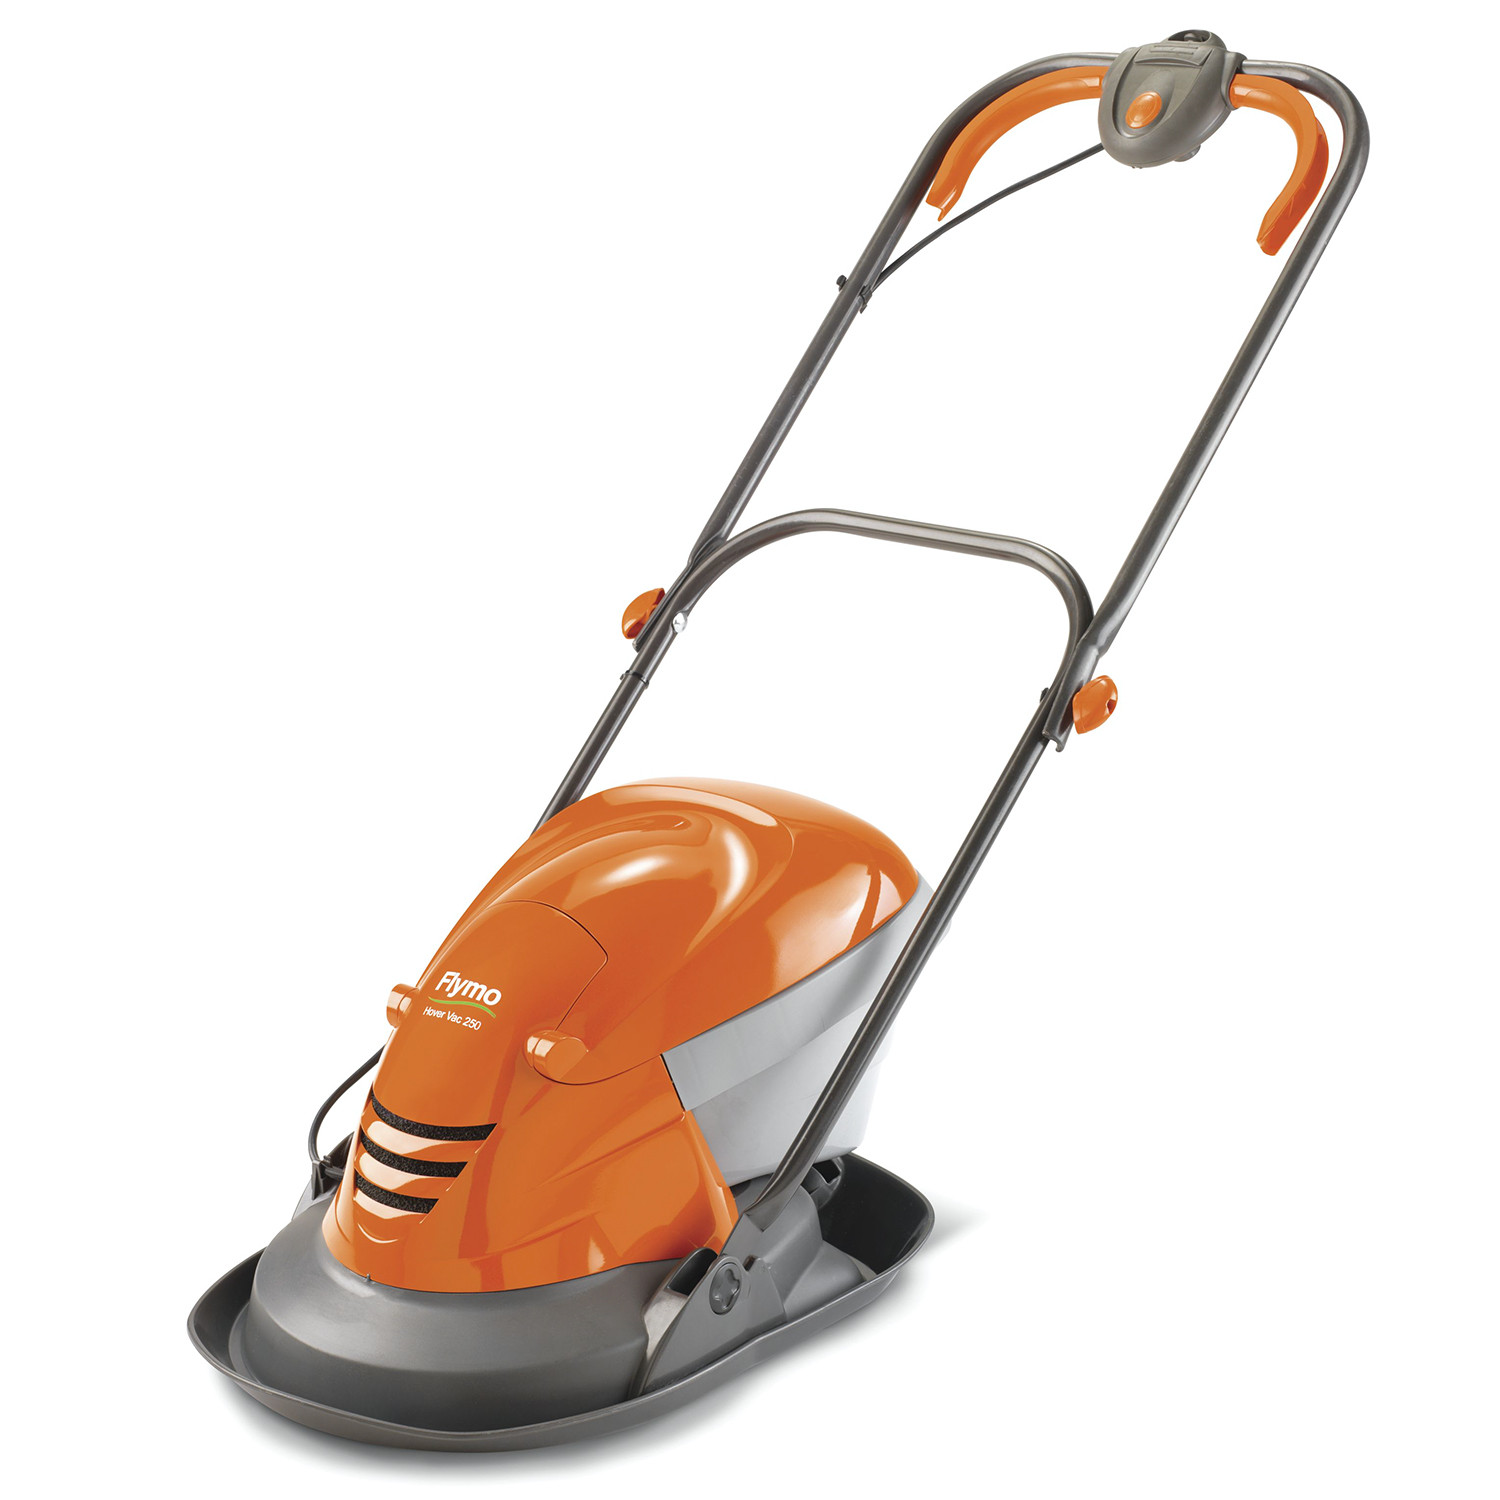 Flymo Hovervac 250 1400W 25cm Hover Lawnmower Image 1